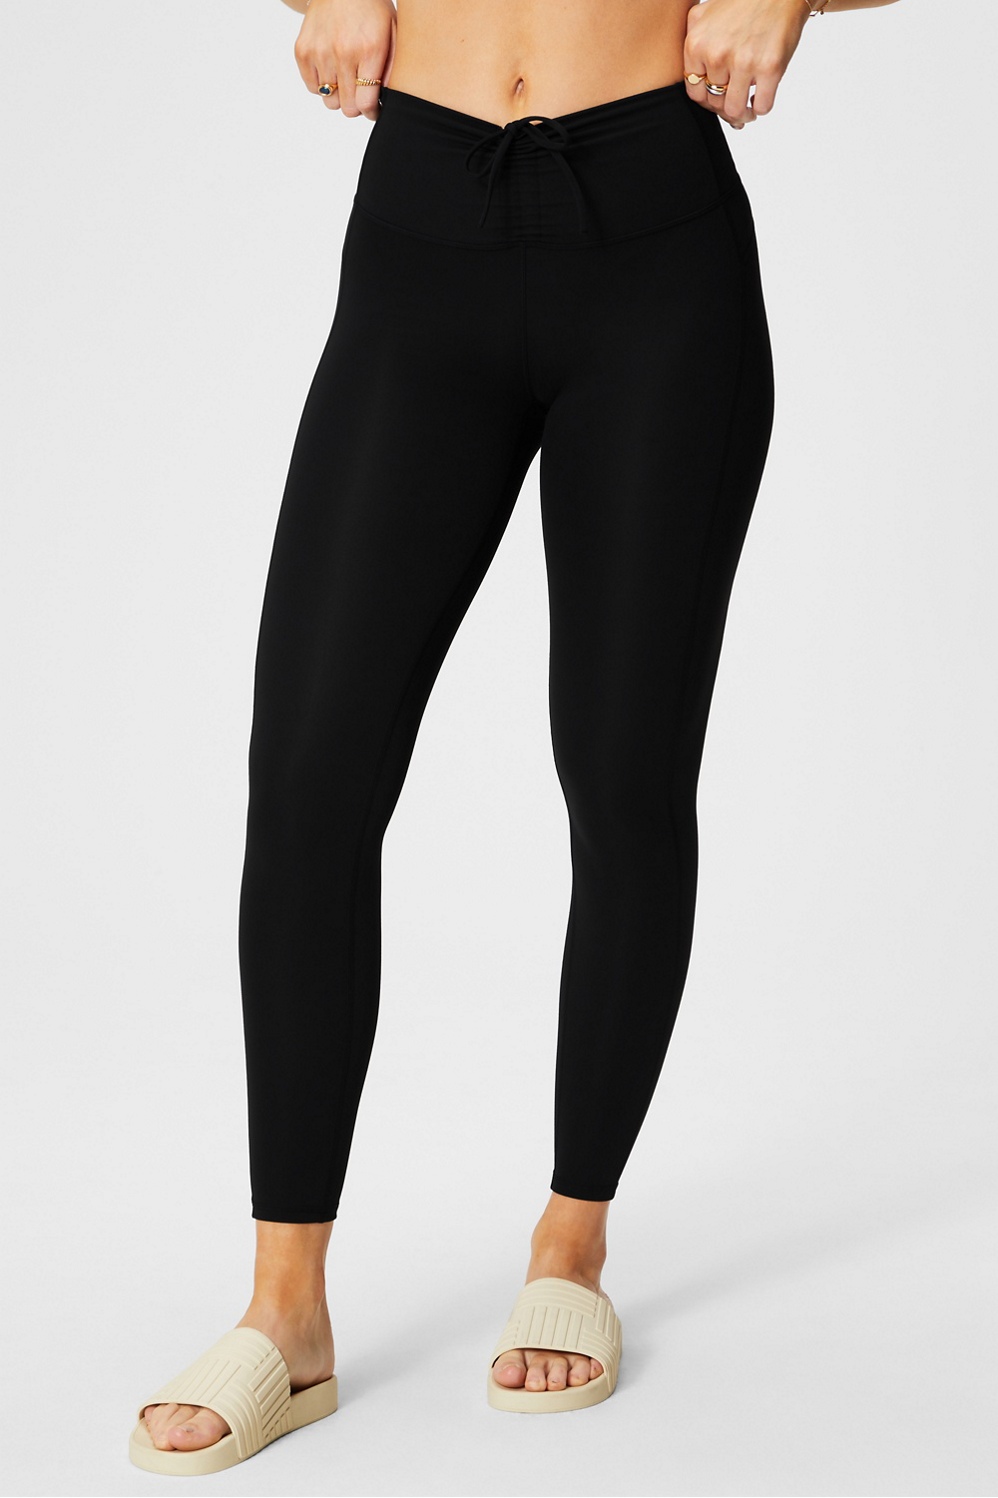 PureLuxe Ultra High Waisted Ruched Legging - Fabletics